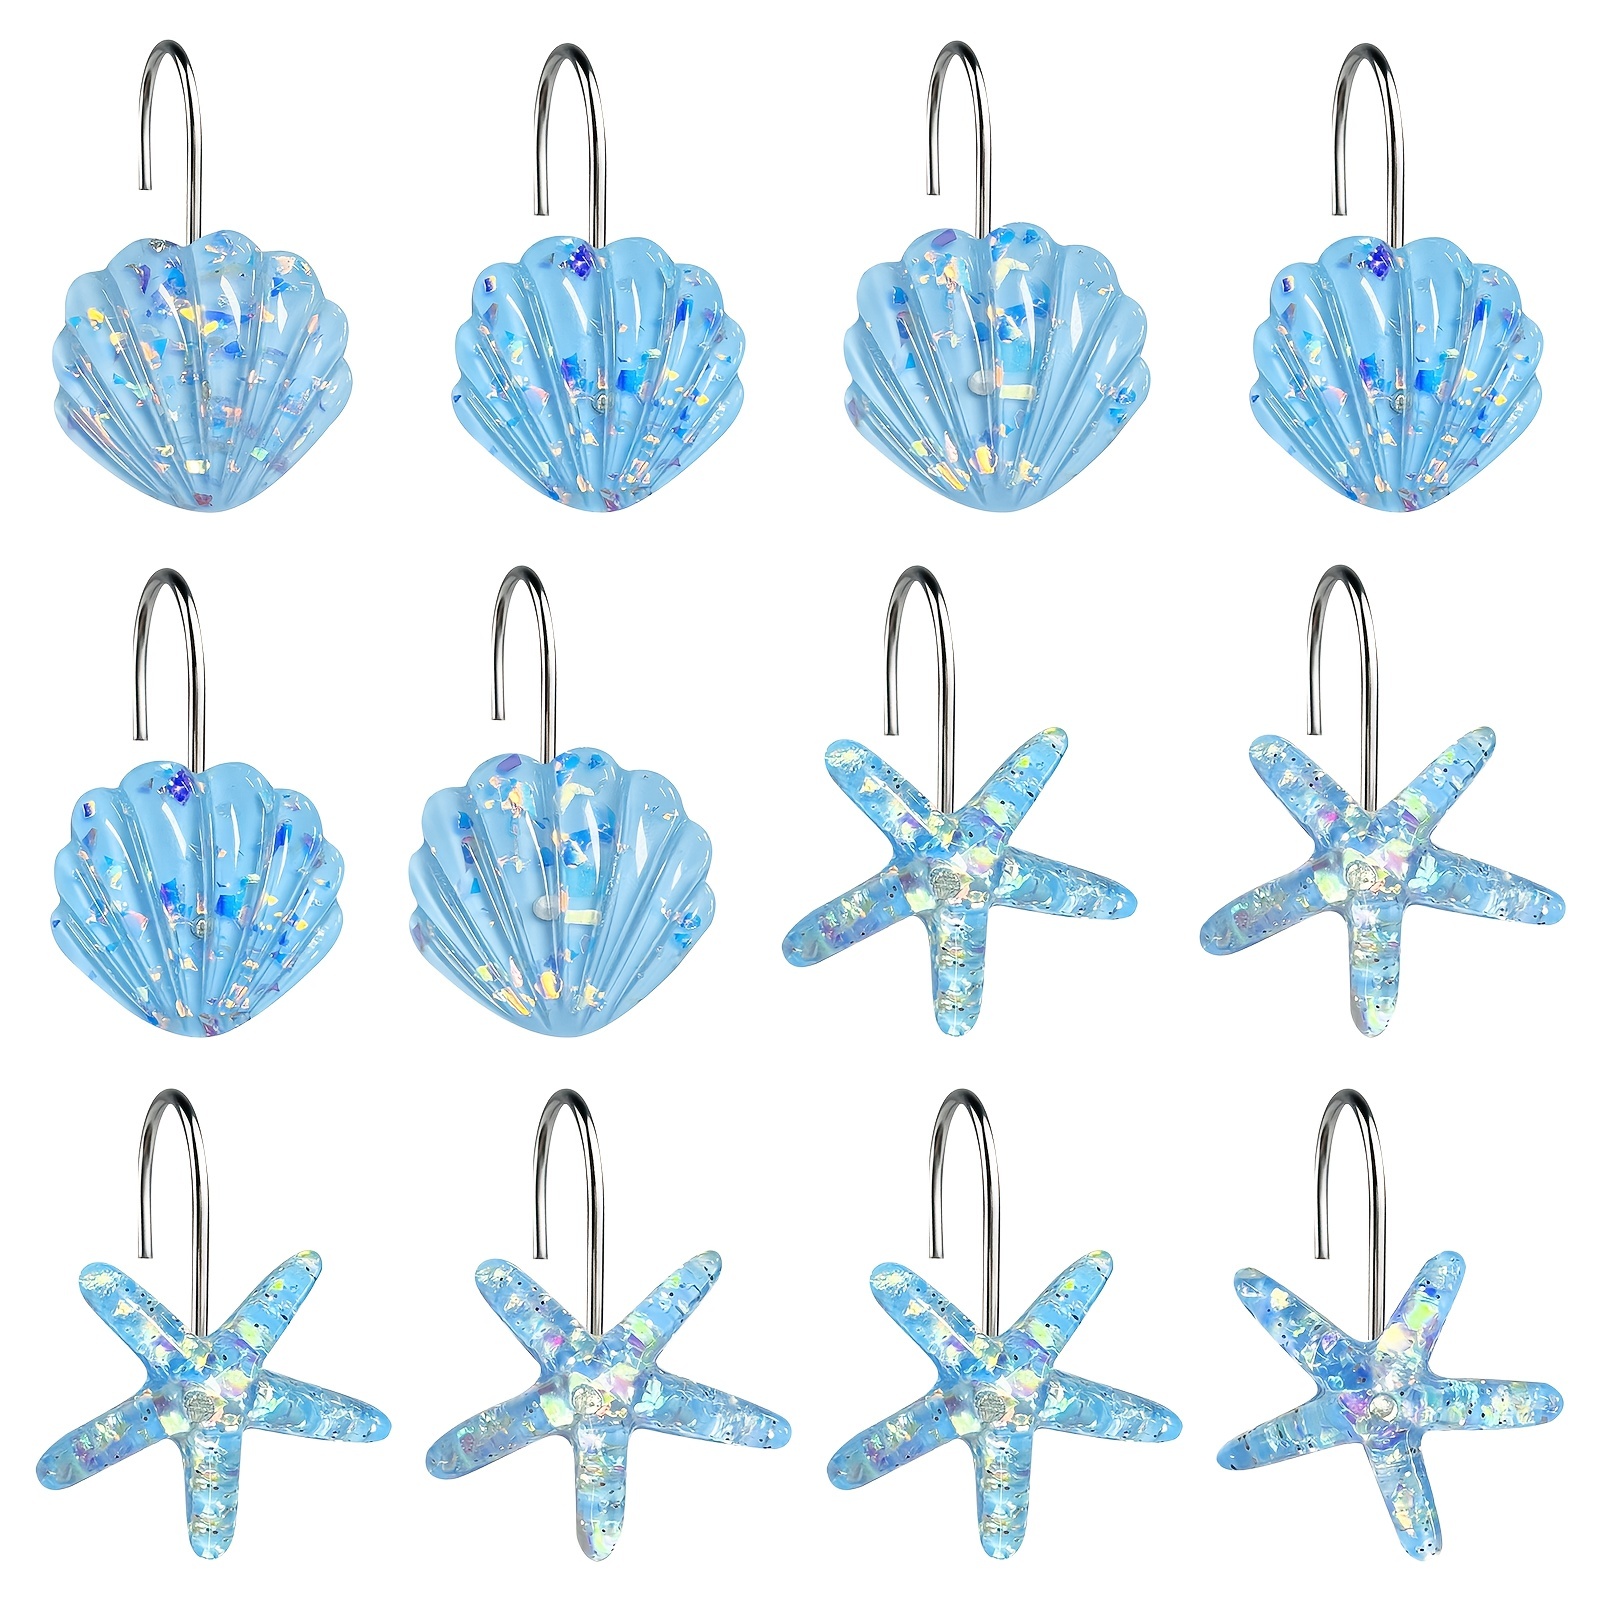 12 pcs Sparkling Starfish and Seashell Shower Curtain Hooks - Resistant to  Corrosion and Stains, Perfect for Ocean Themed Bathroom Decor, Blue and Whi